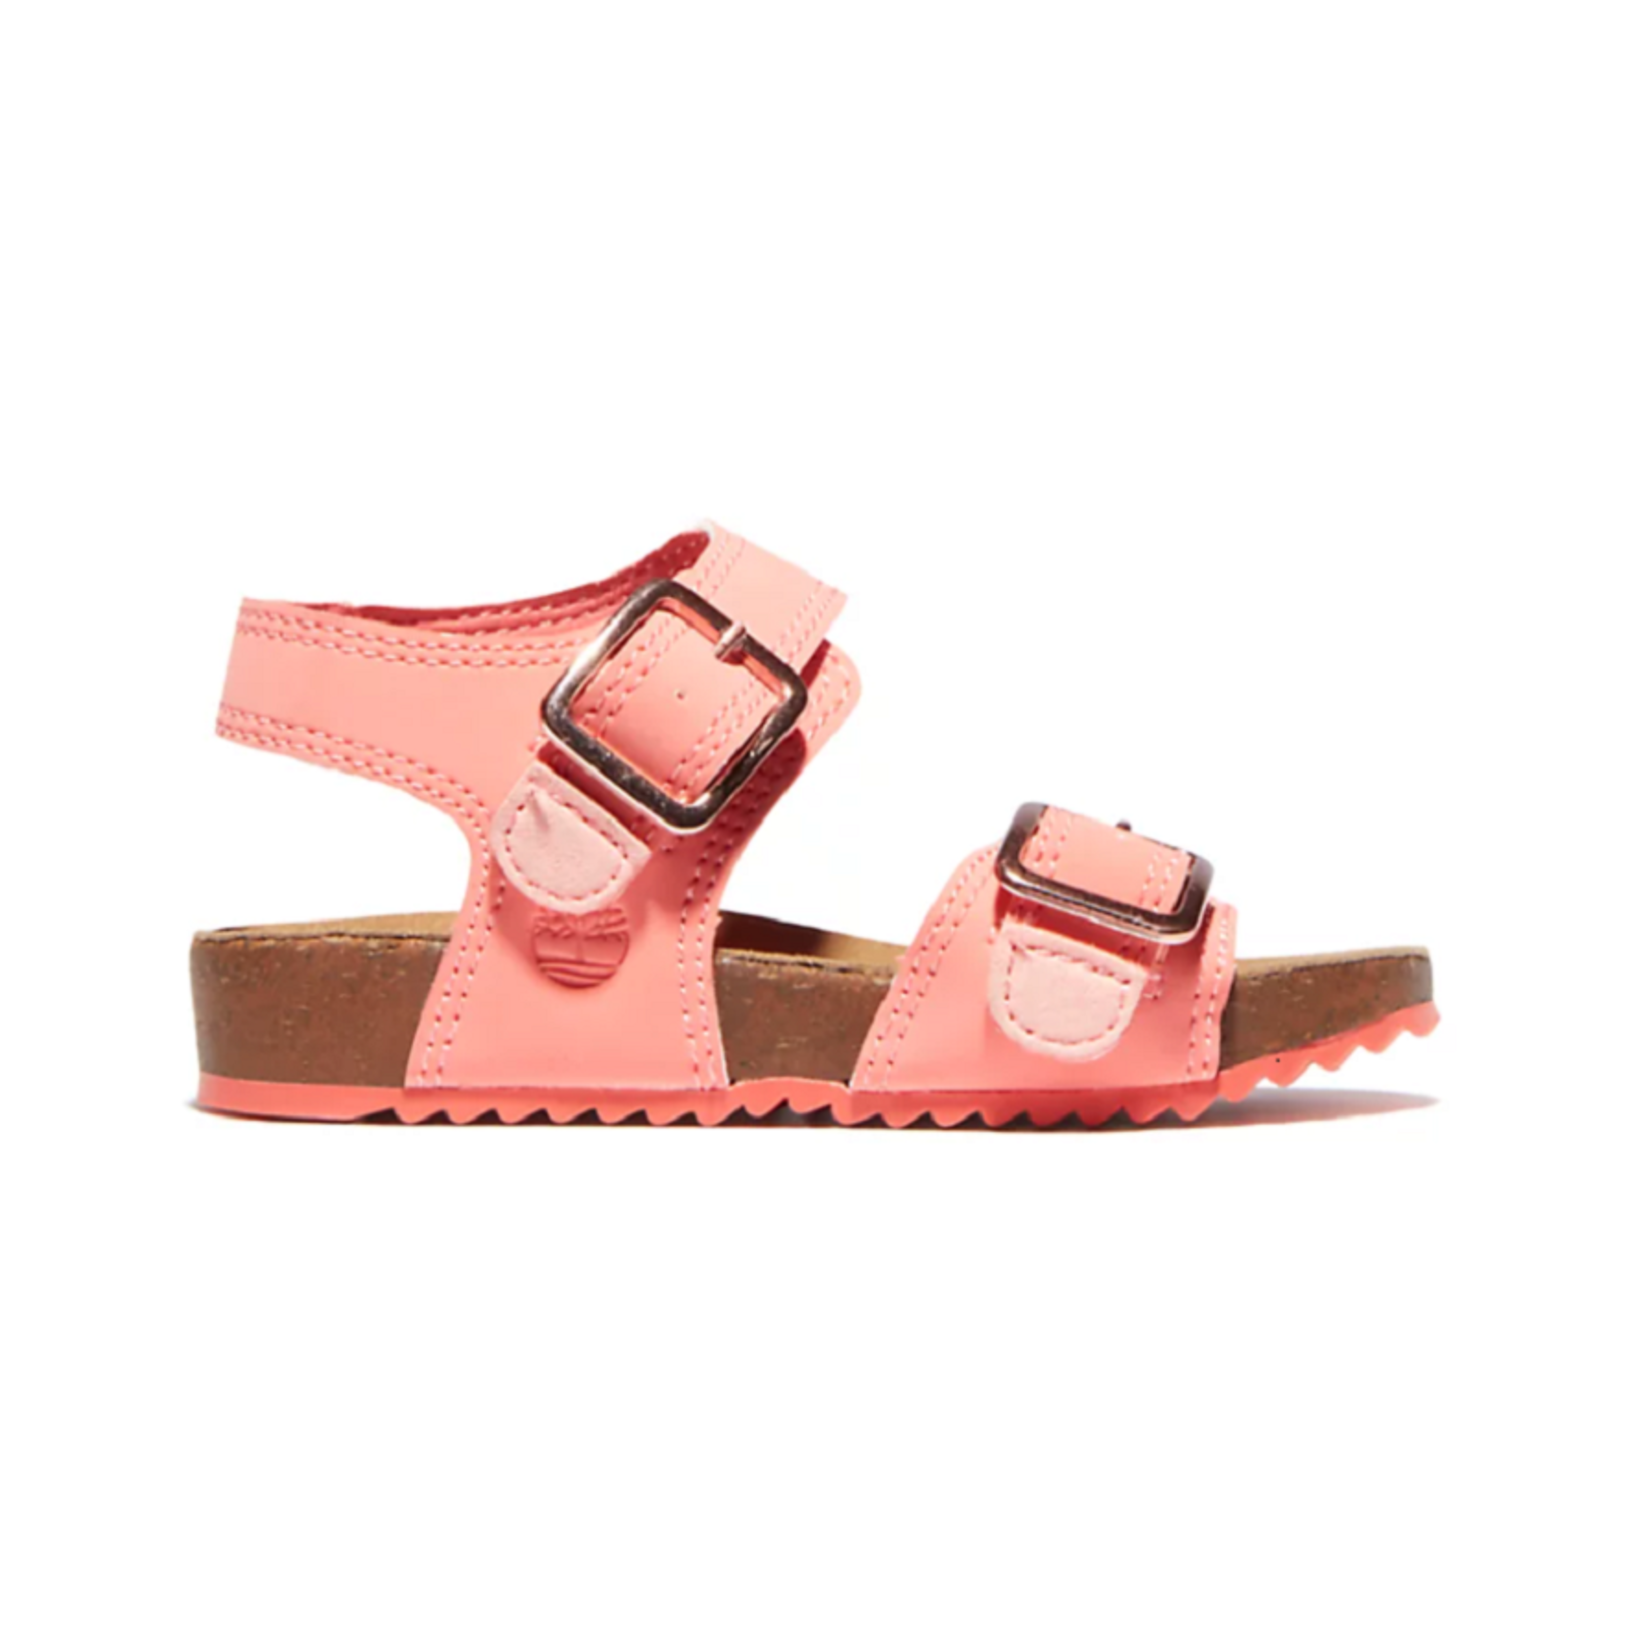 Timberland CASTLE ISLAND SANDAL FOR TODDLER IN PINK